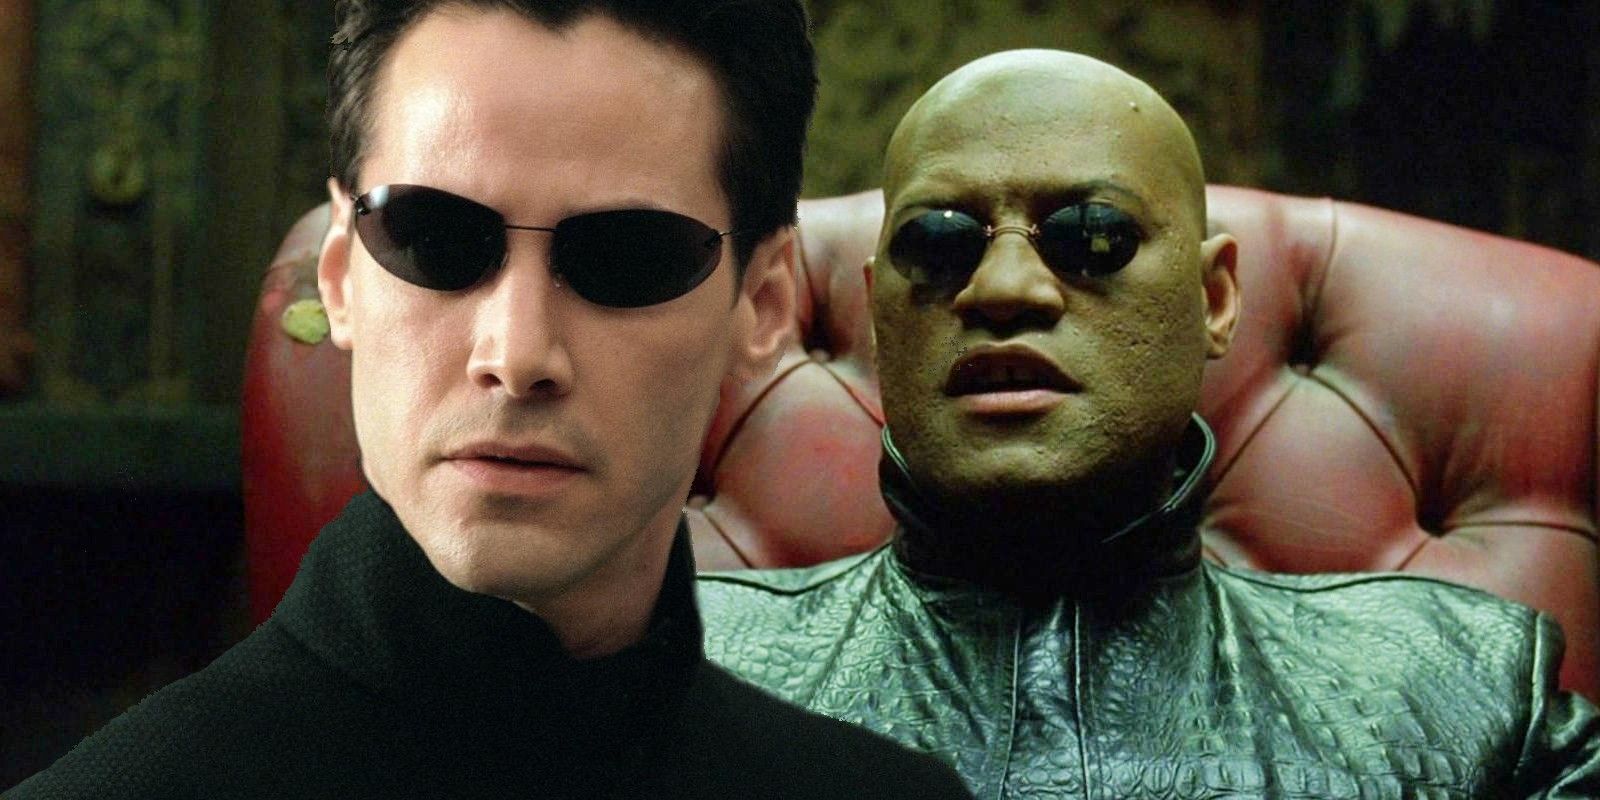 Keanu Reeves as Neo and Laurence Fishburne in The Matrix